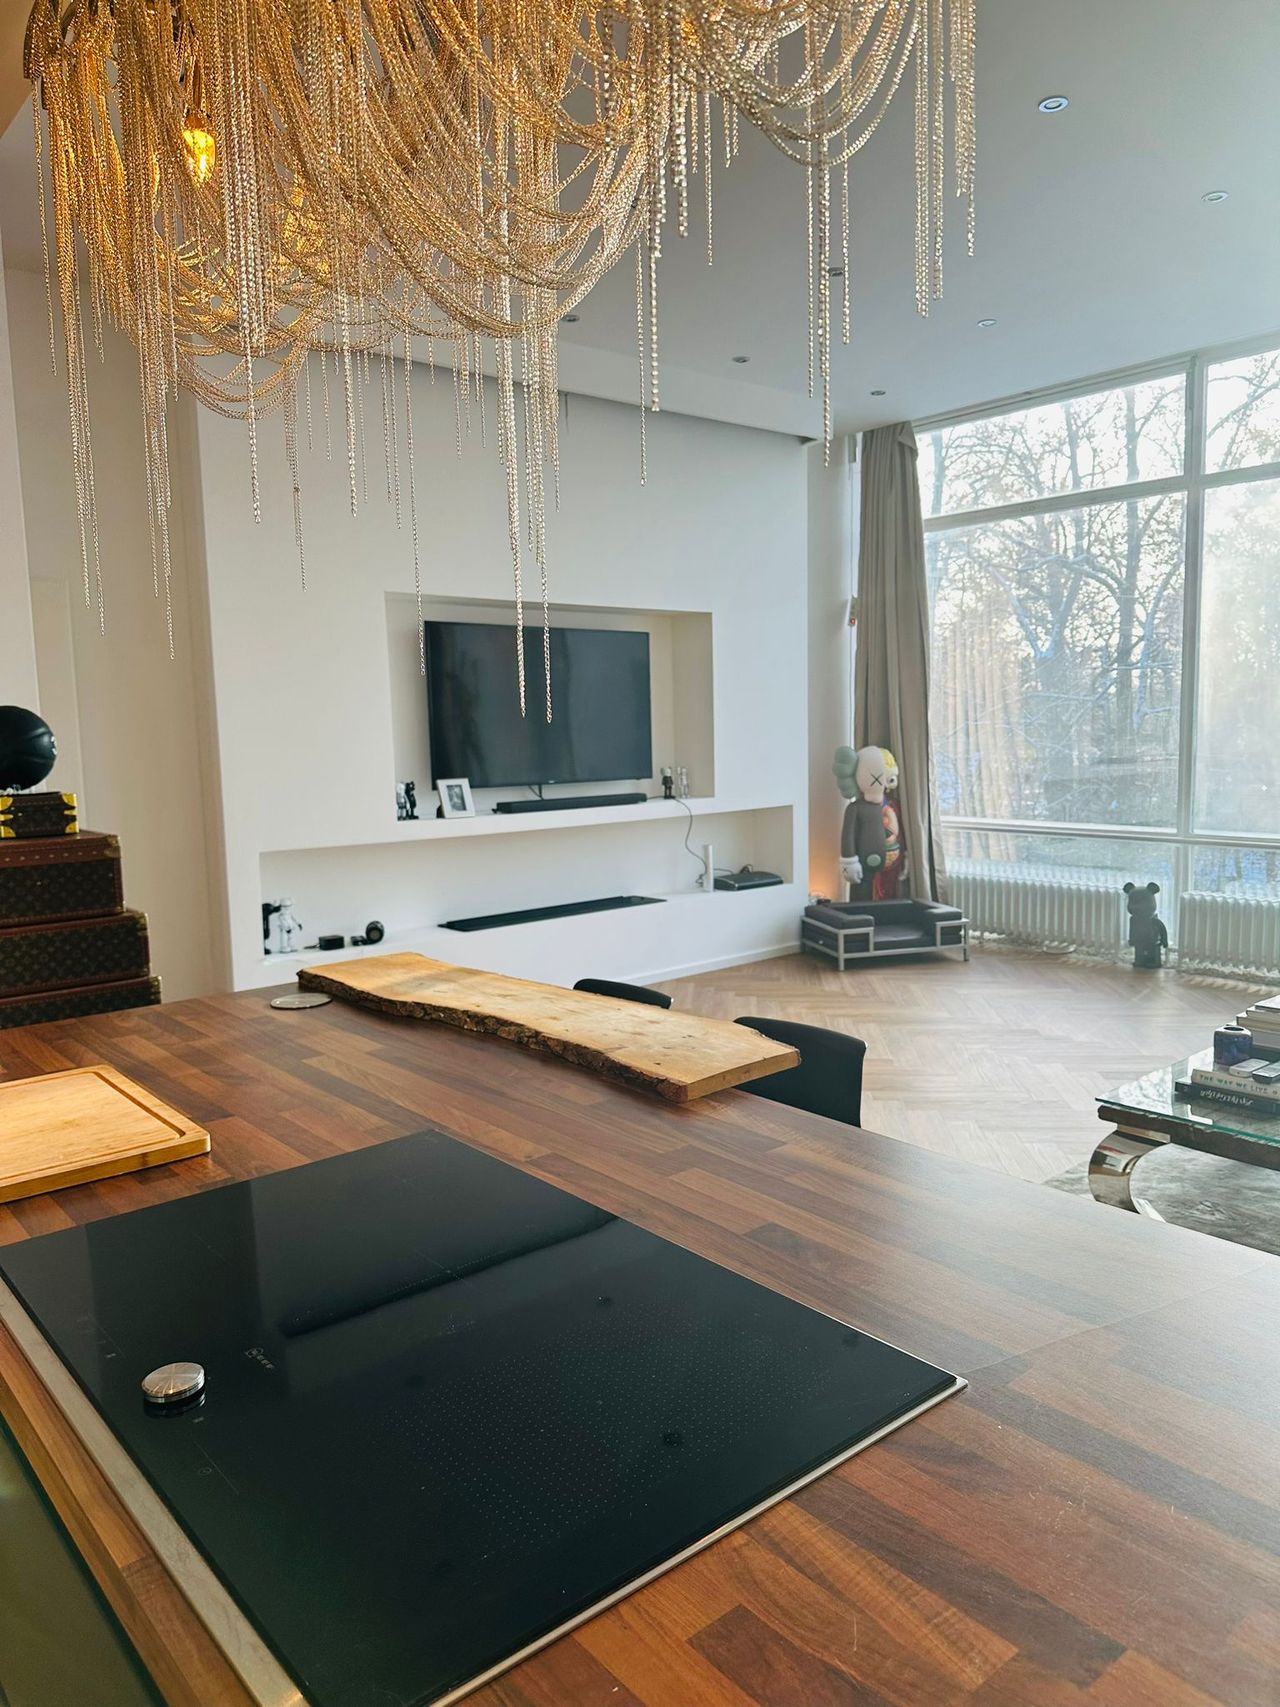 Exclusive Luxury Loft-Style Apartment in the Heart of Grunewald, Berlin